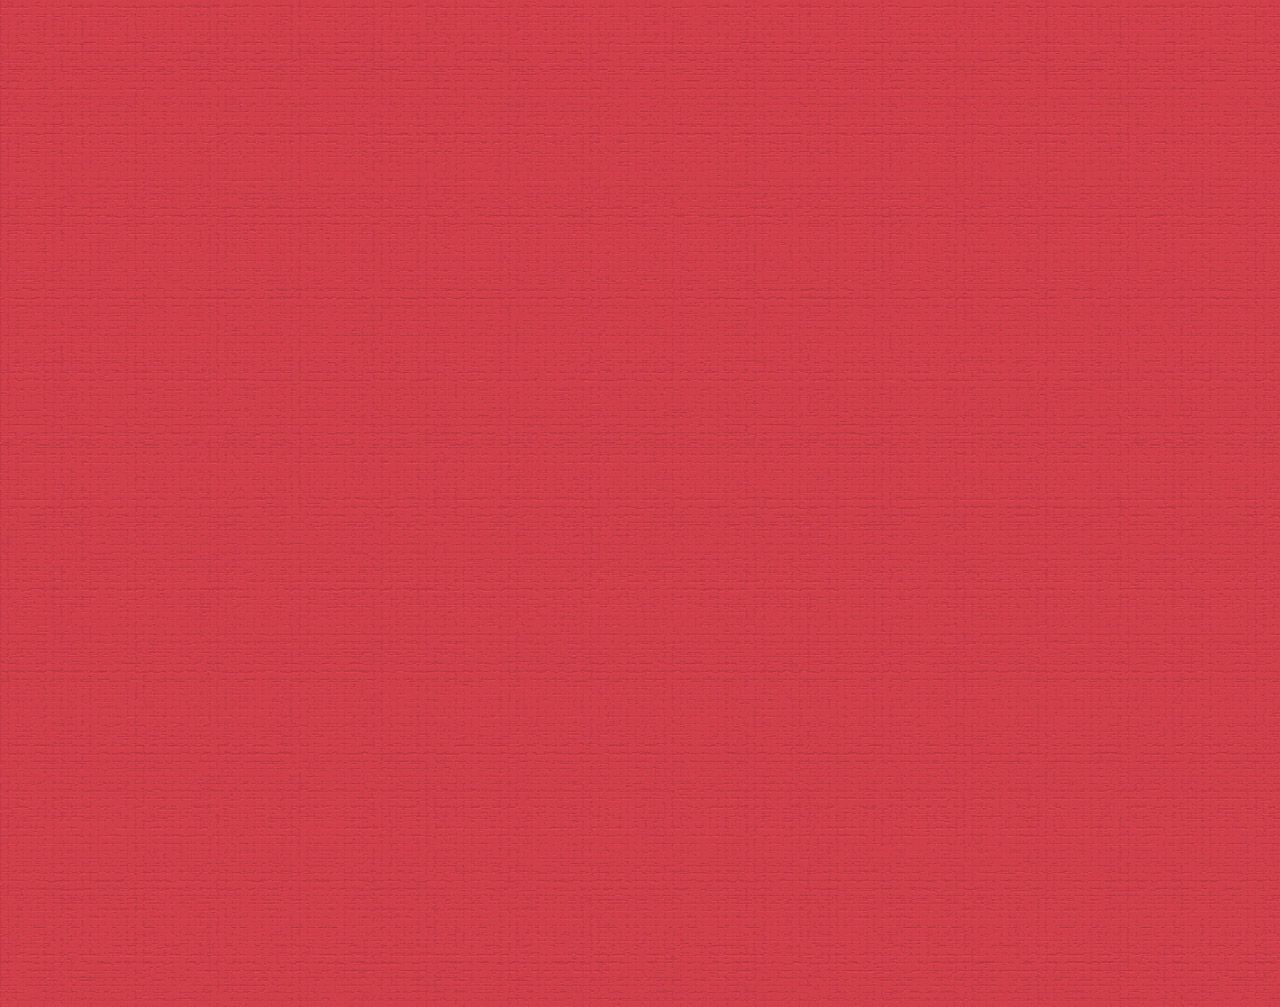 Plain Light Red Background HD Red Aesthetic Wallpapers